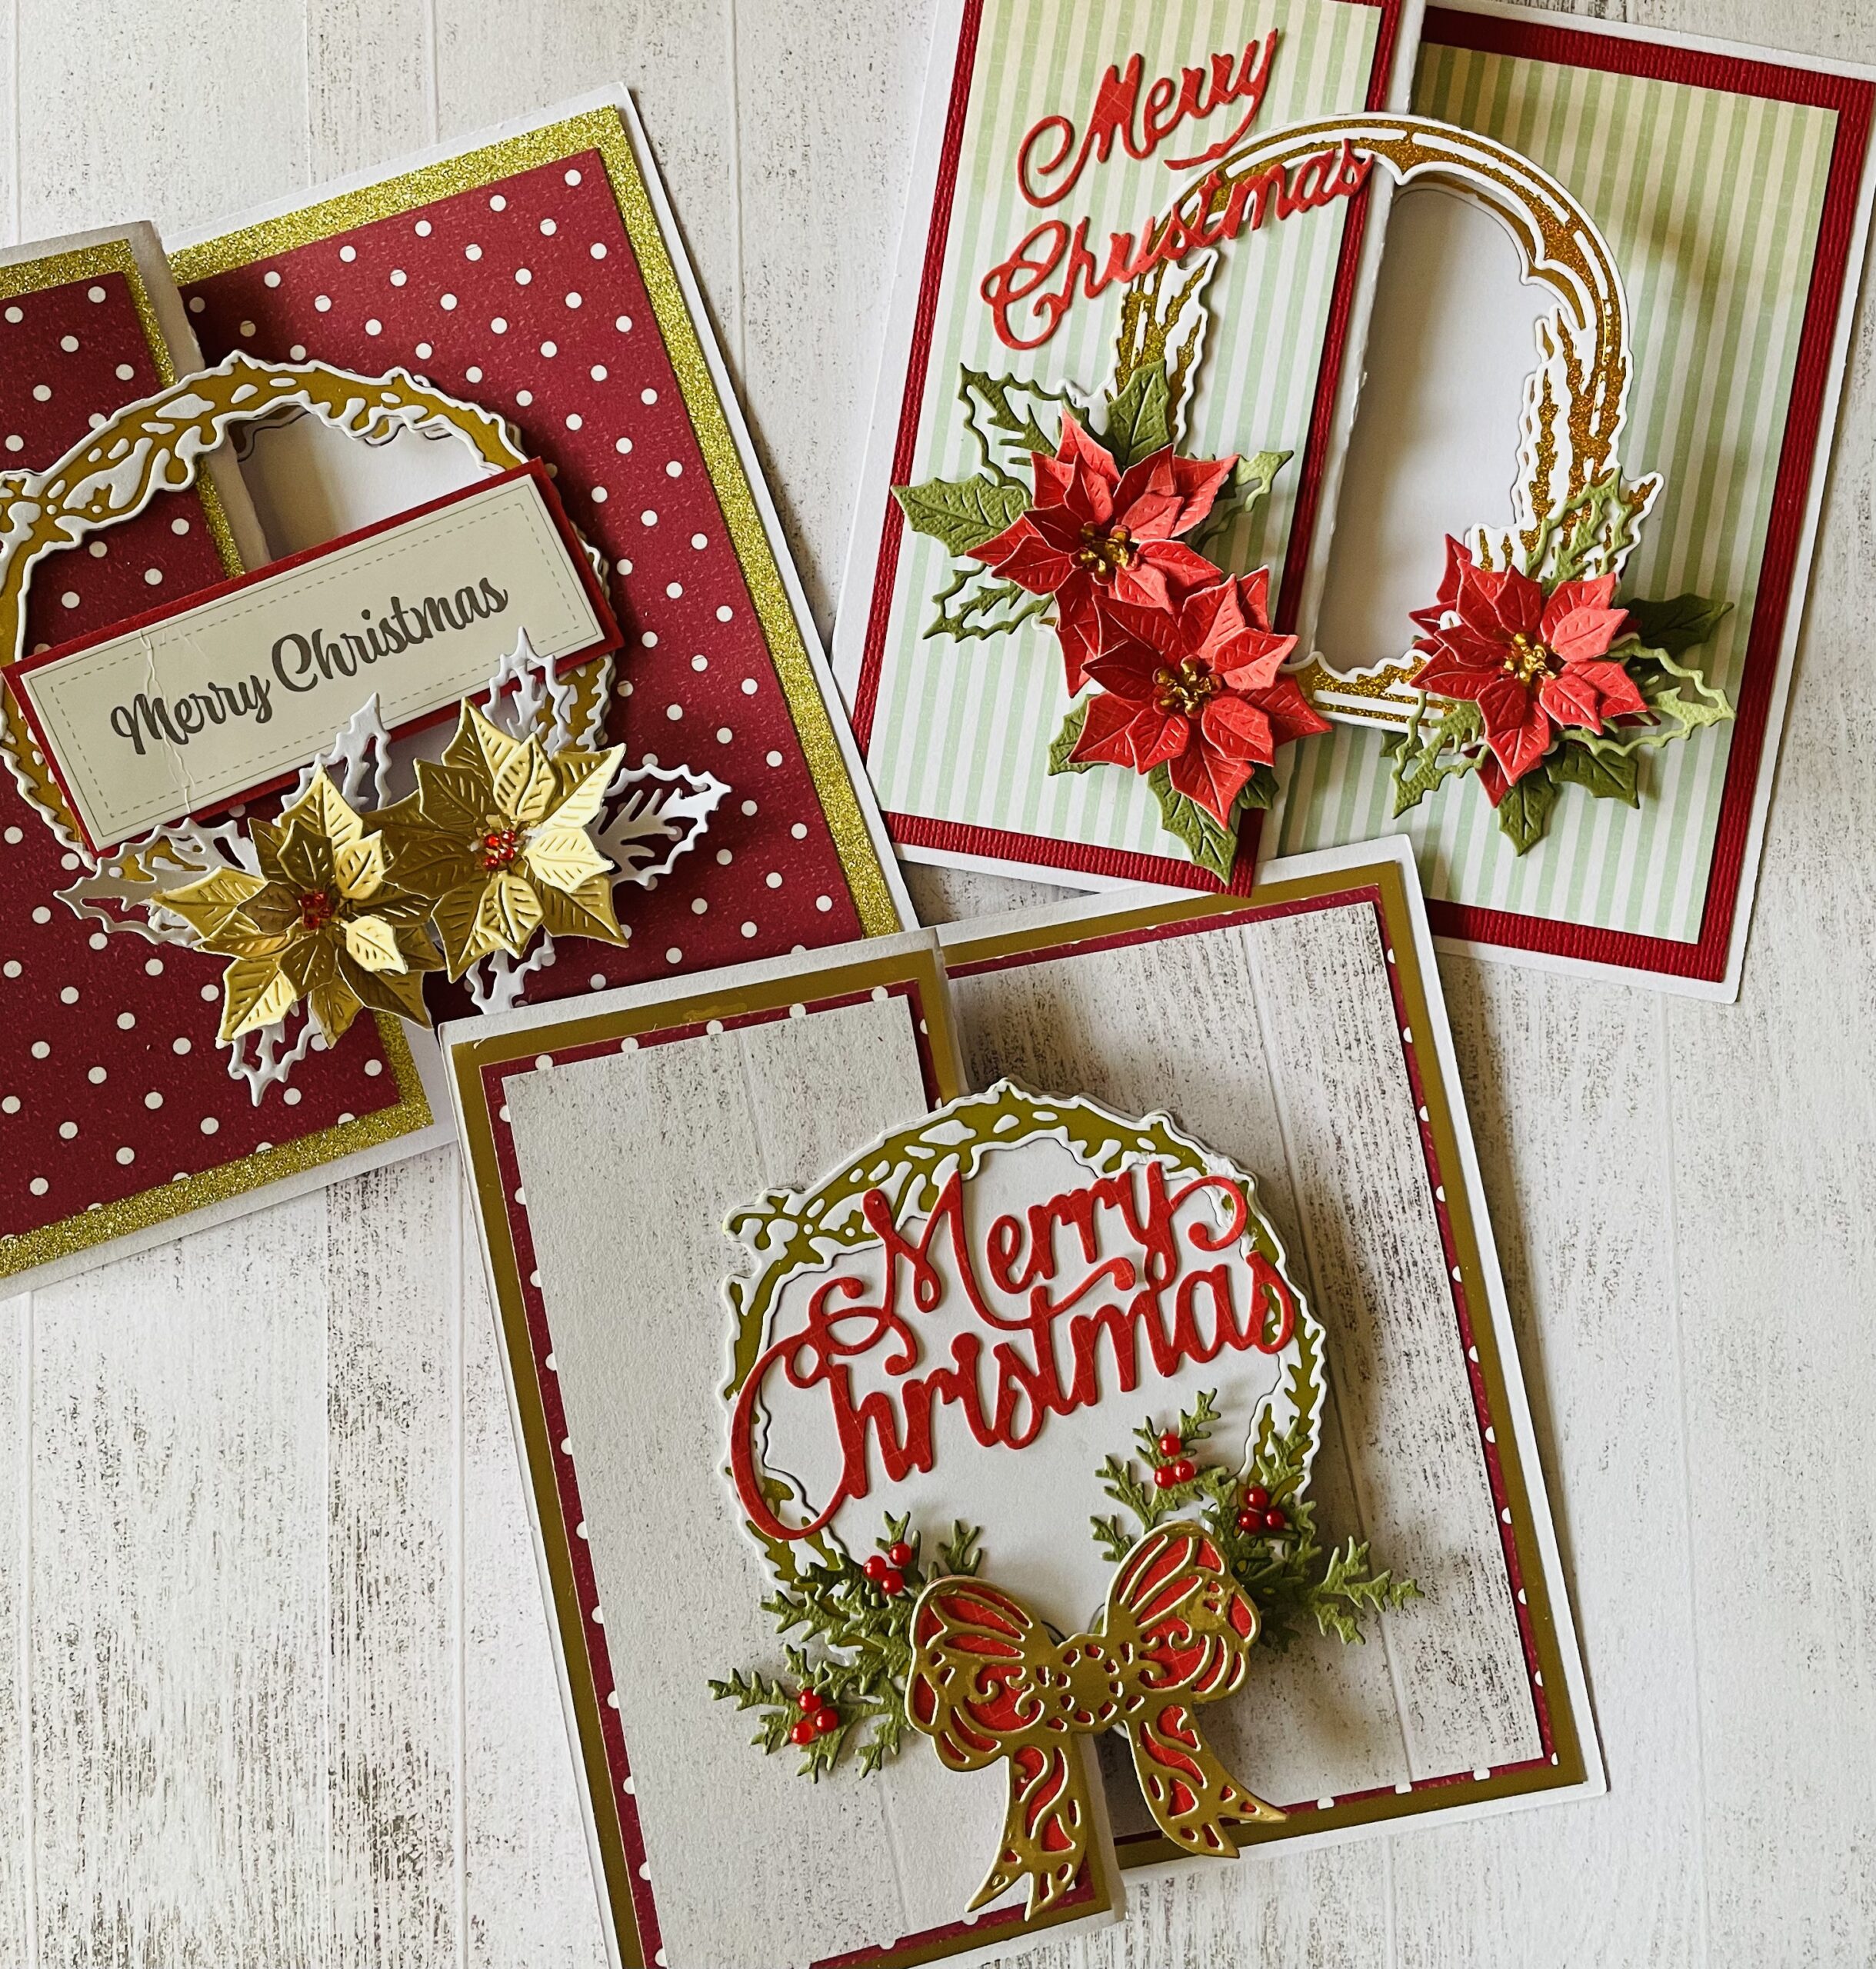 Wonderful Foiled Christmas cards with Adriana